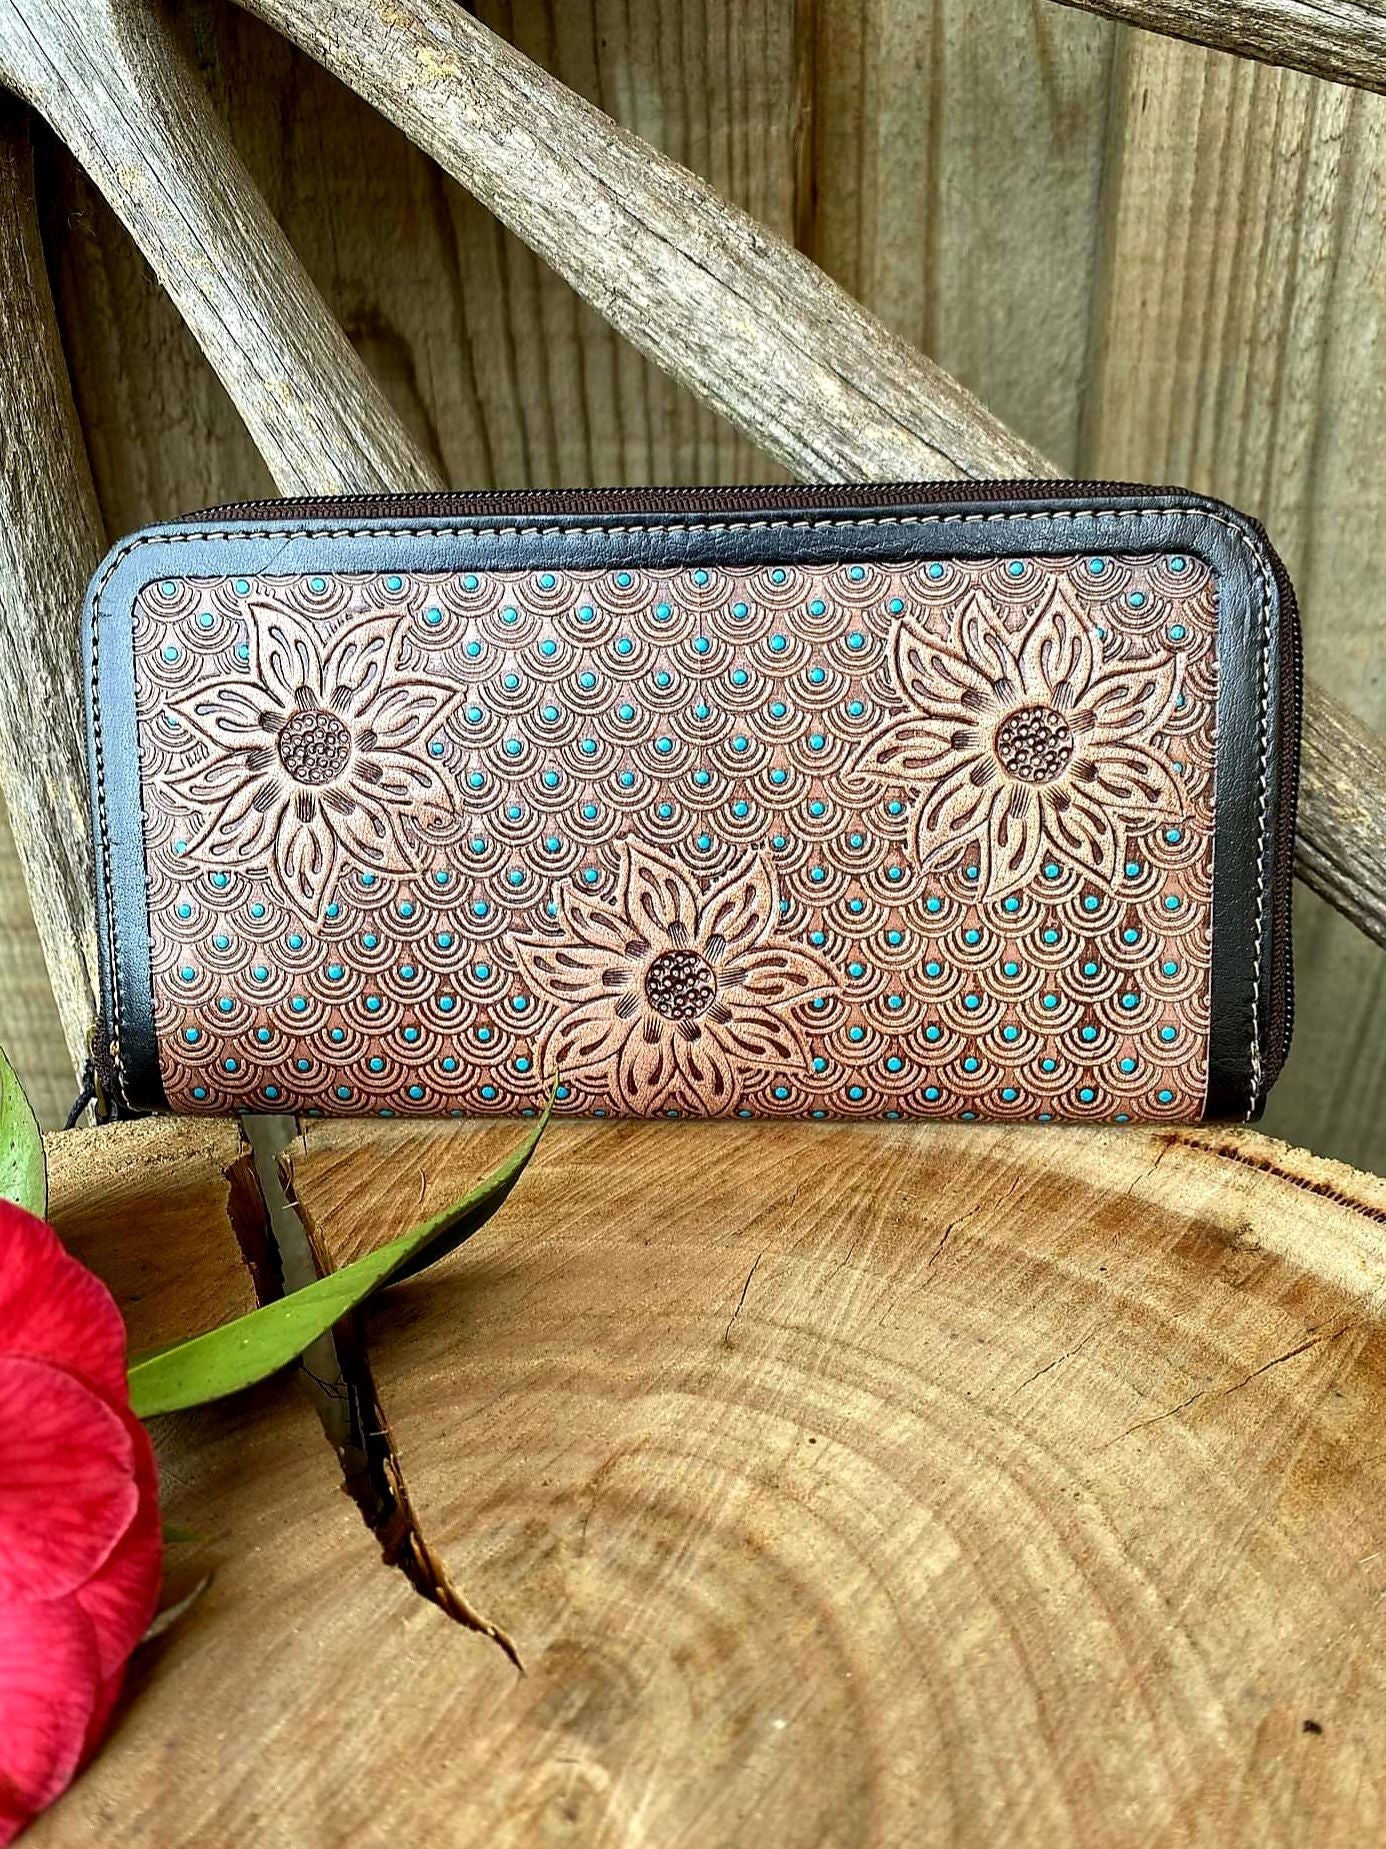 Western Leather Purse Floral Tooled Turquoise Inlay Wallet